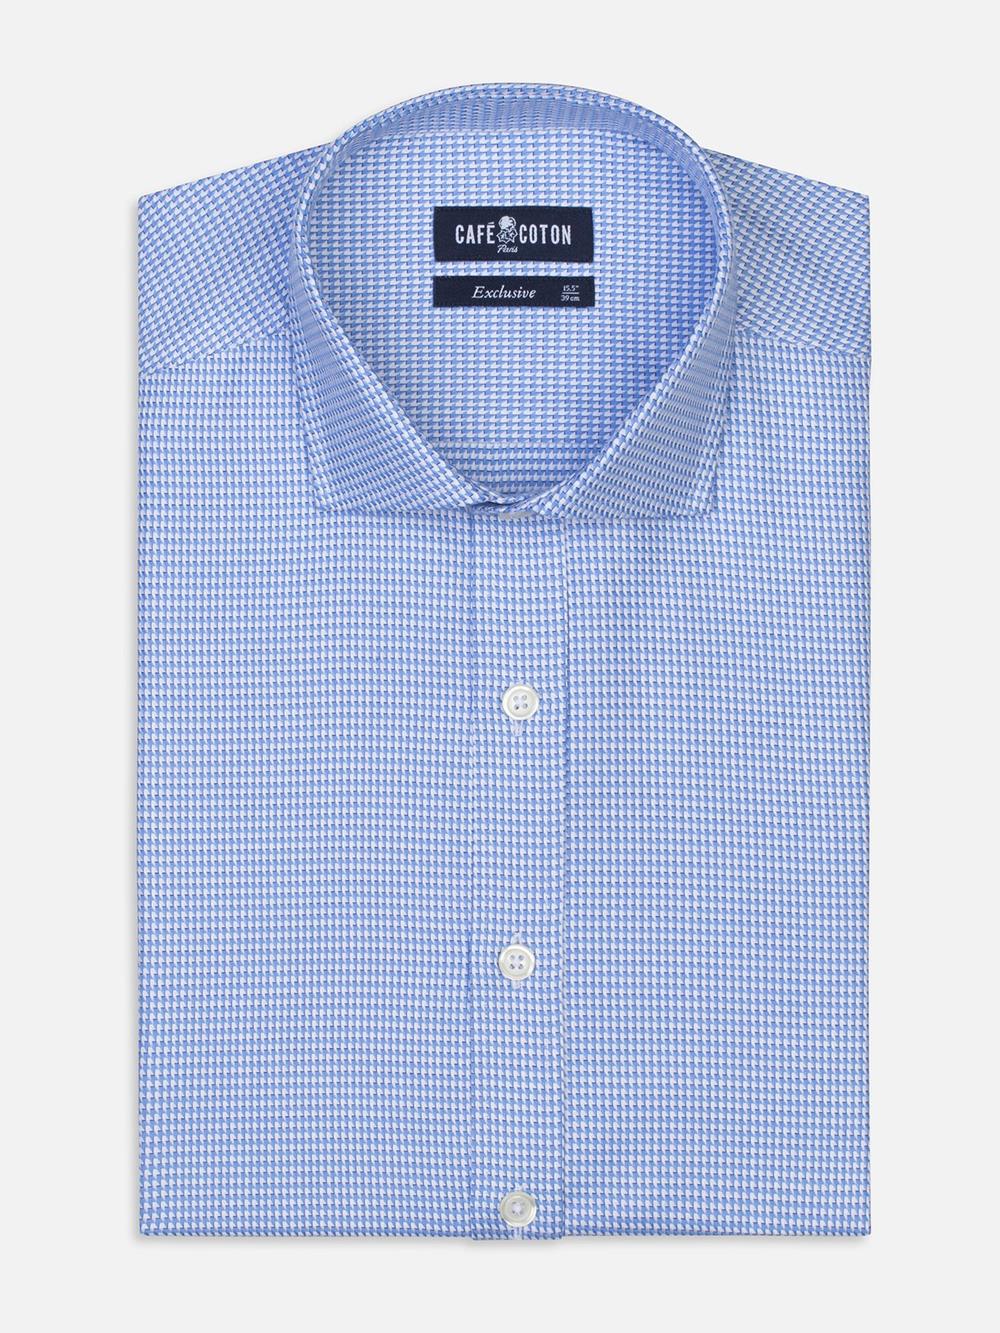 Blue sky and white printed houndstooth twill slim fit shirt